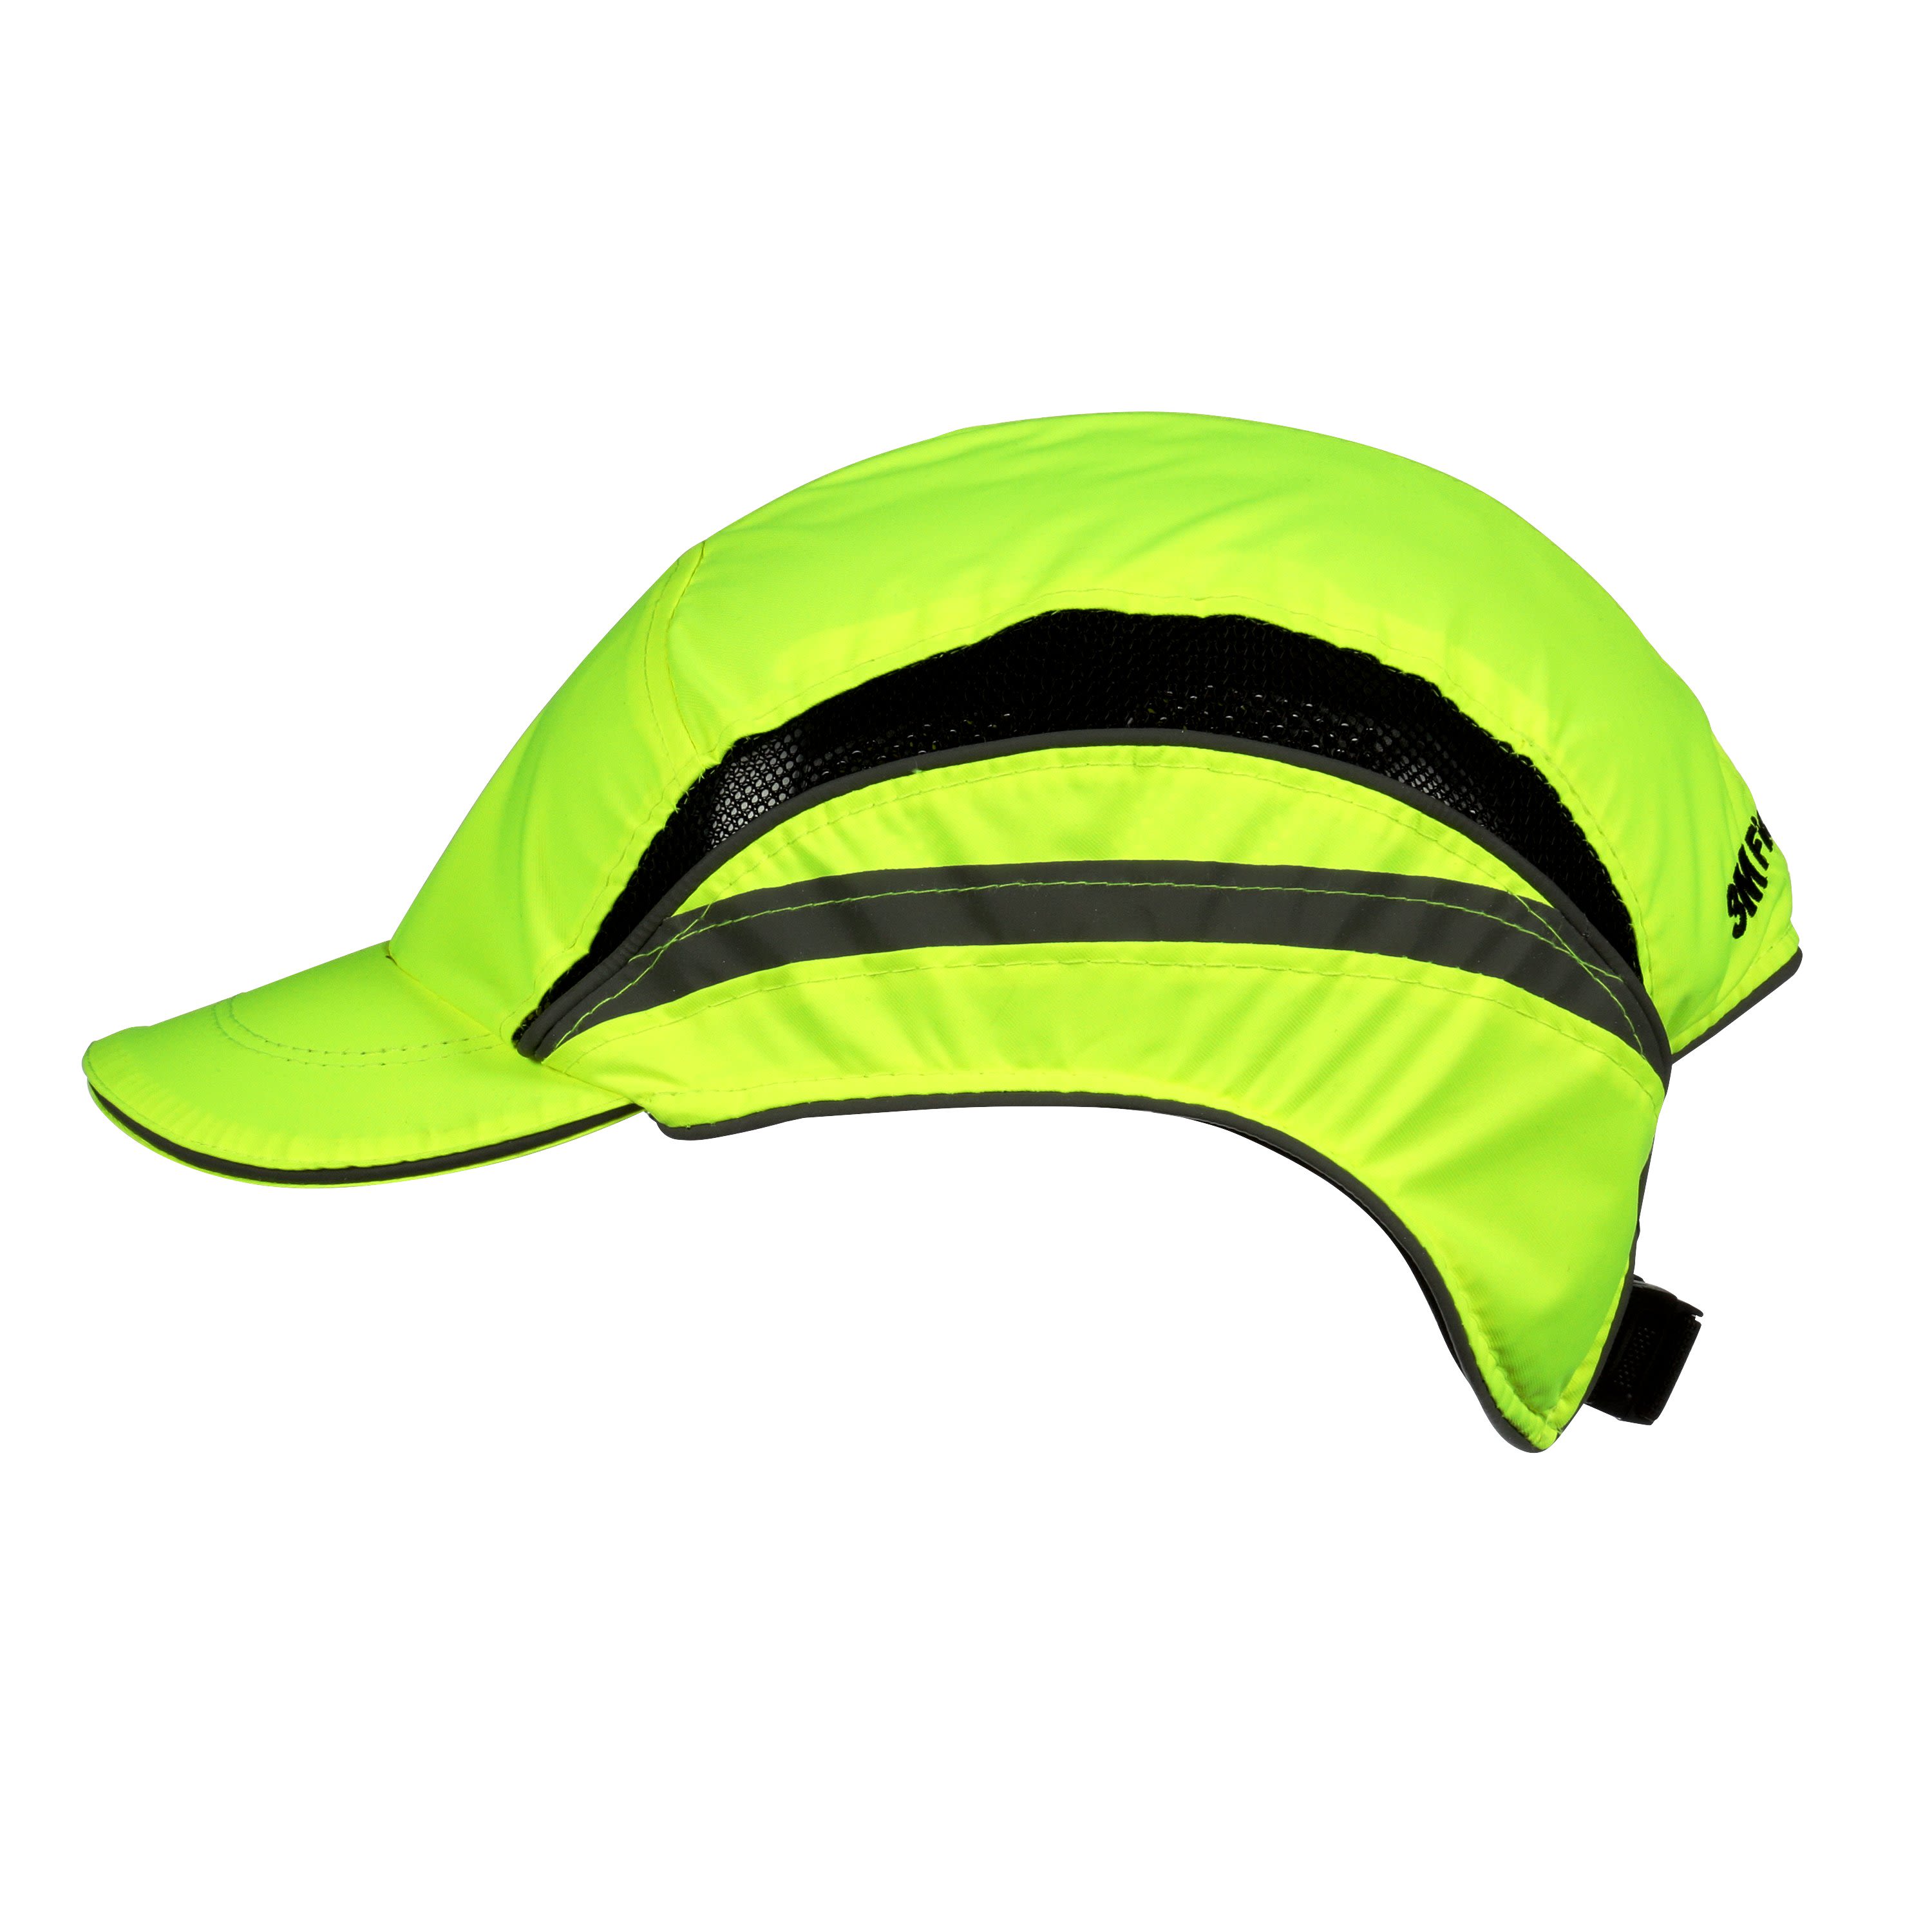 3M Yellow Short Peaked Bump Cap, ABS Protective Material